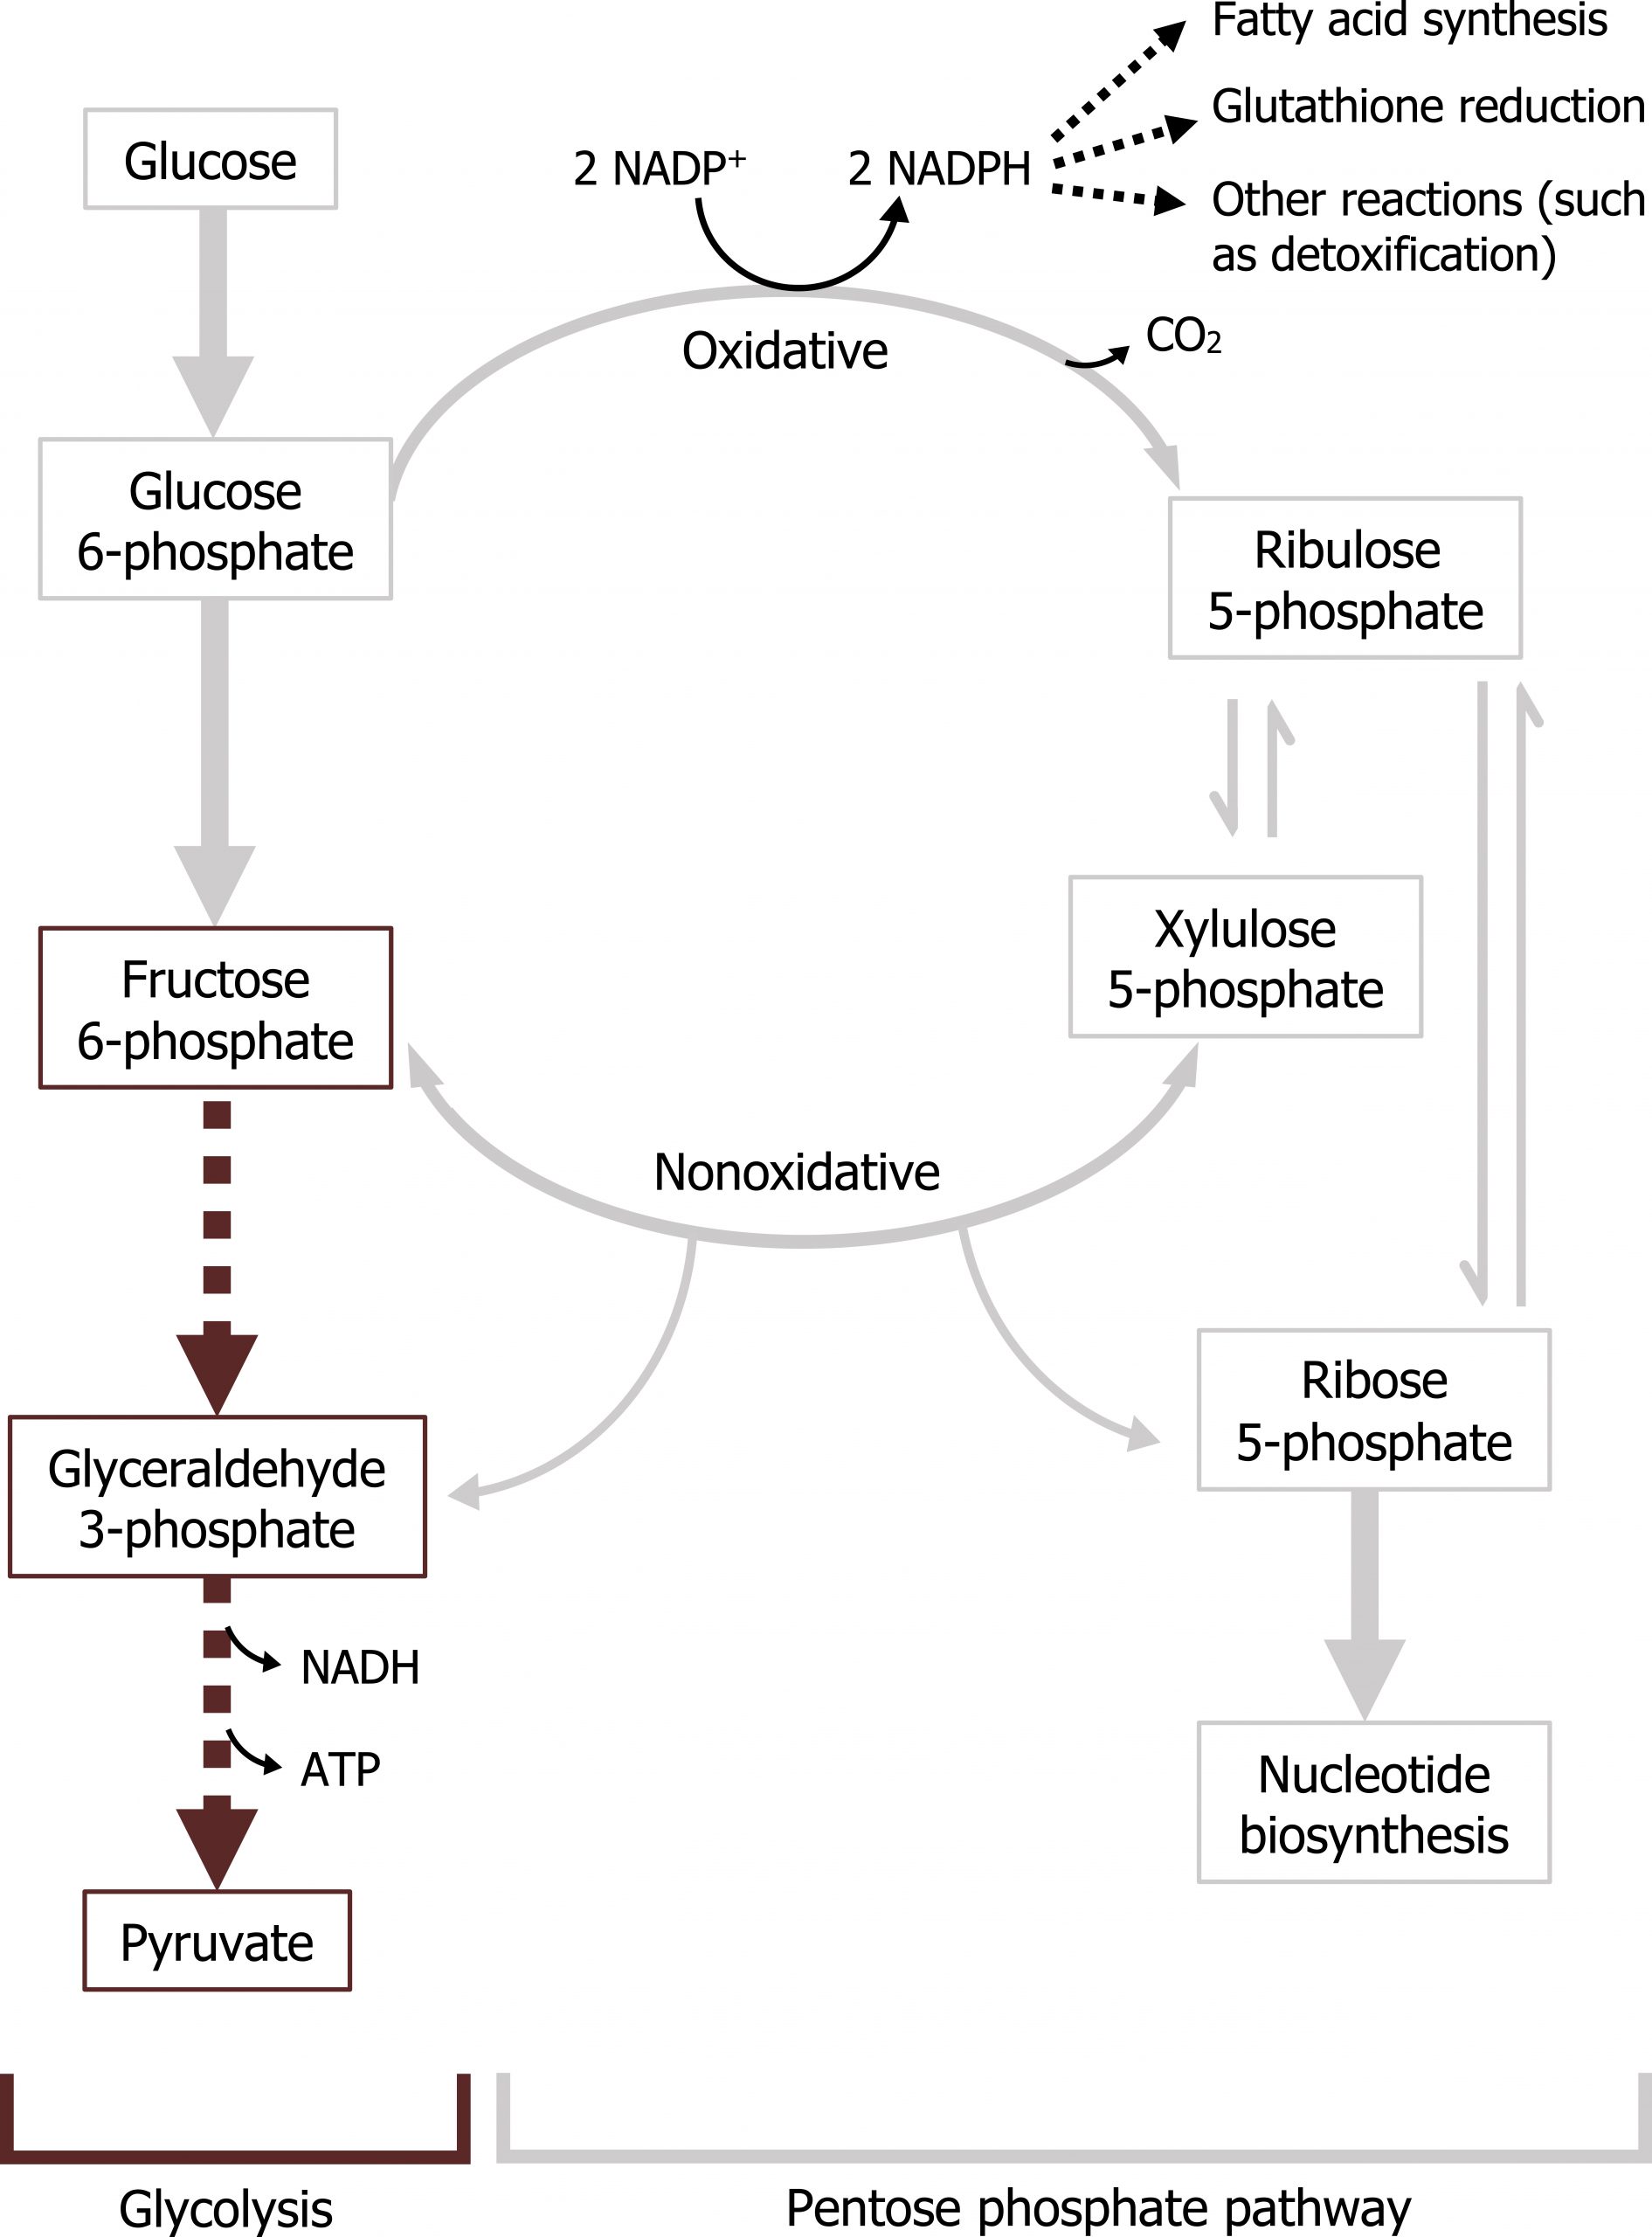 Glycolysis: Glucose arrow Glucose 6-phosphate arrow Fructose 6-phosphate arrow glyceraldehyde 3-phosphate arrow with loss of NADH and ATP to pyruvate. Pentose phosphate pathway: Glucose 6-phosphate arrow with text oxidative to ribulose 5-phosphate bidirectional arrow xylulose 5-phosphate bidirectional arrow with text non-oxidative fructose 6-phosphate. On oxidative arrow, CO2 leaves and 2 NADP+ arrow 2 NADPH arrows to fatty acid synthesis, glutathione reduction, and other reactions (such as detoxification). On non-oxidative arrow, arrows to Ribose 5-phosphate and glyceraldehyde 3-phosphate. Ribulose 5-phosphate bidirectional arrow ribose 5-phosphate arrow nucleotide biosynthesis